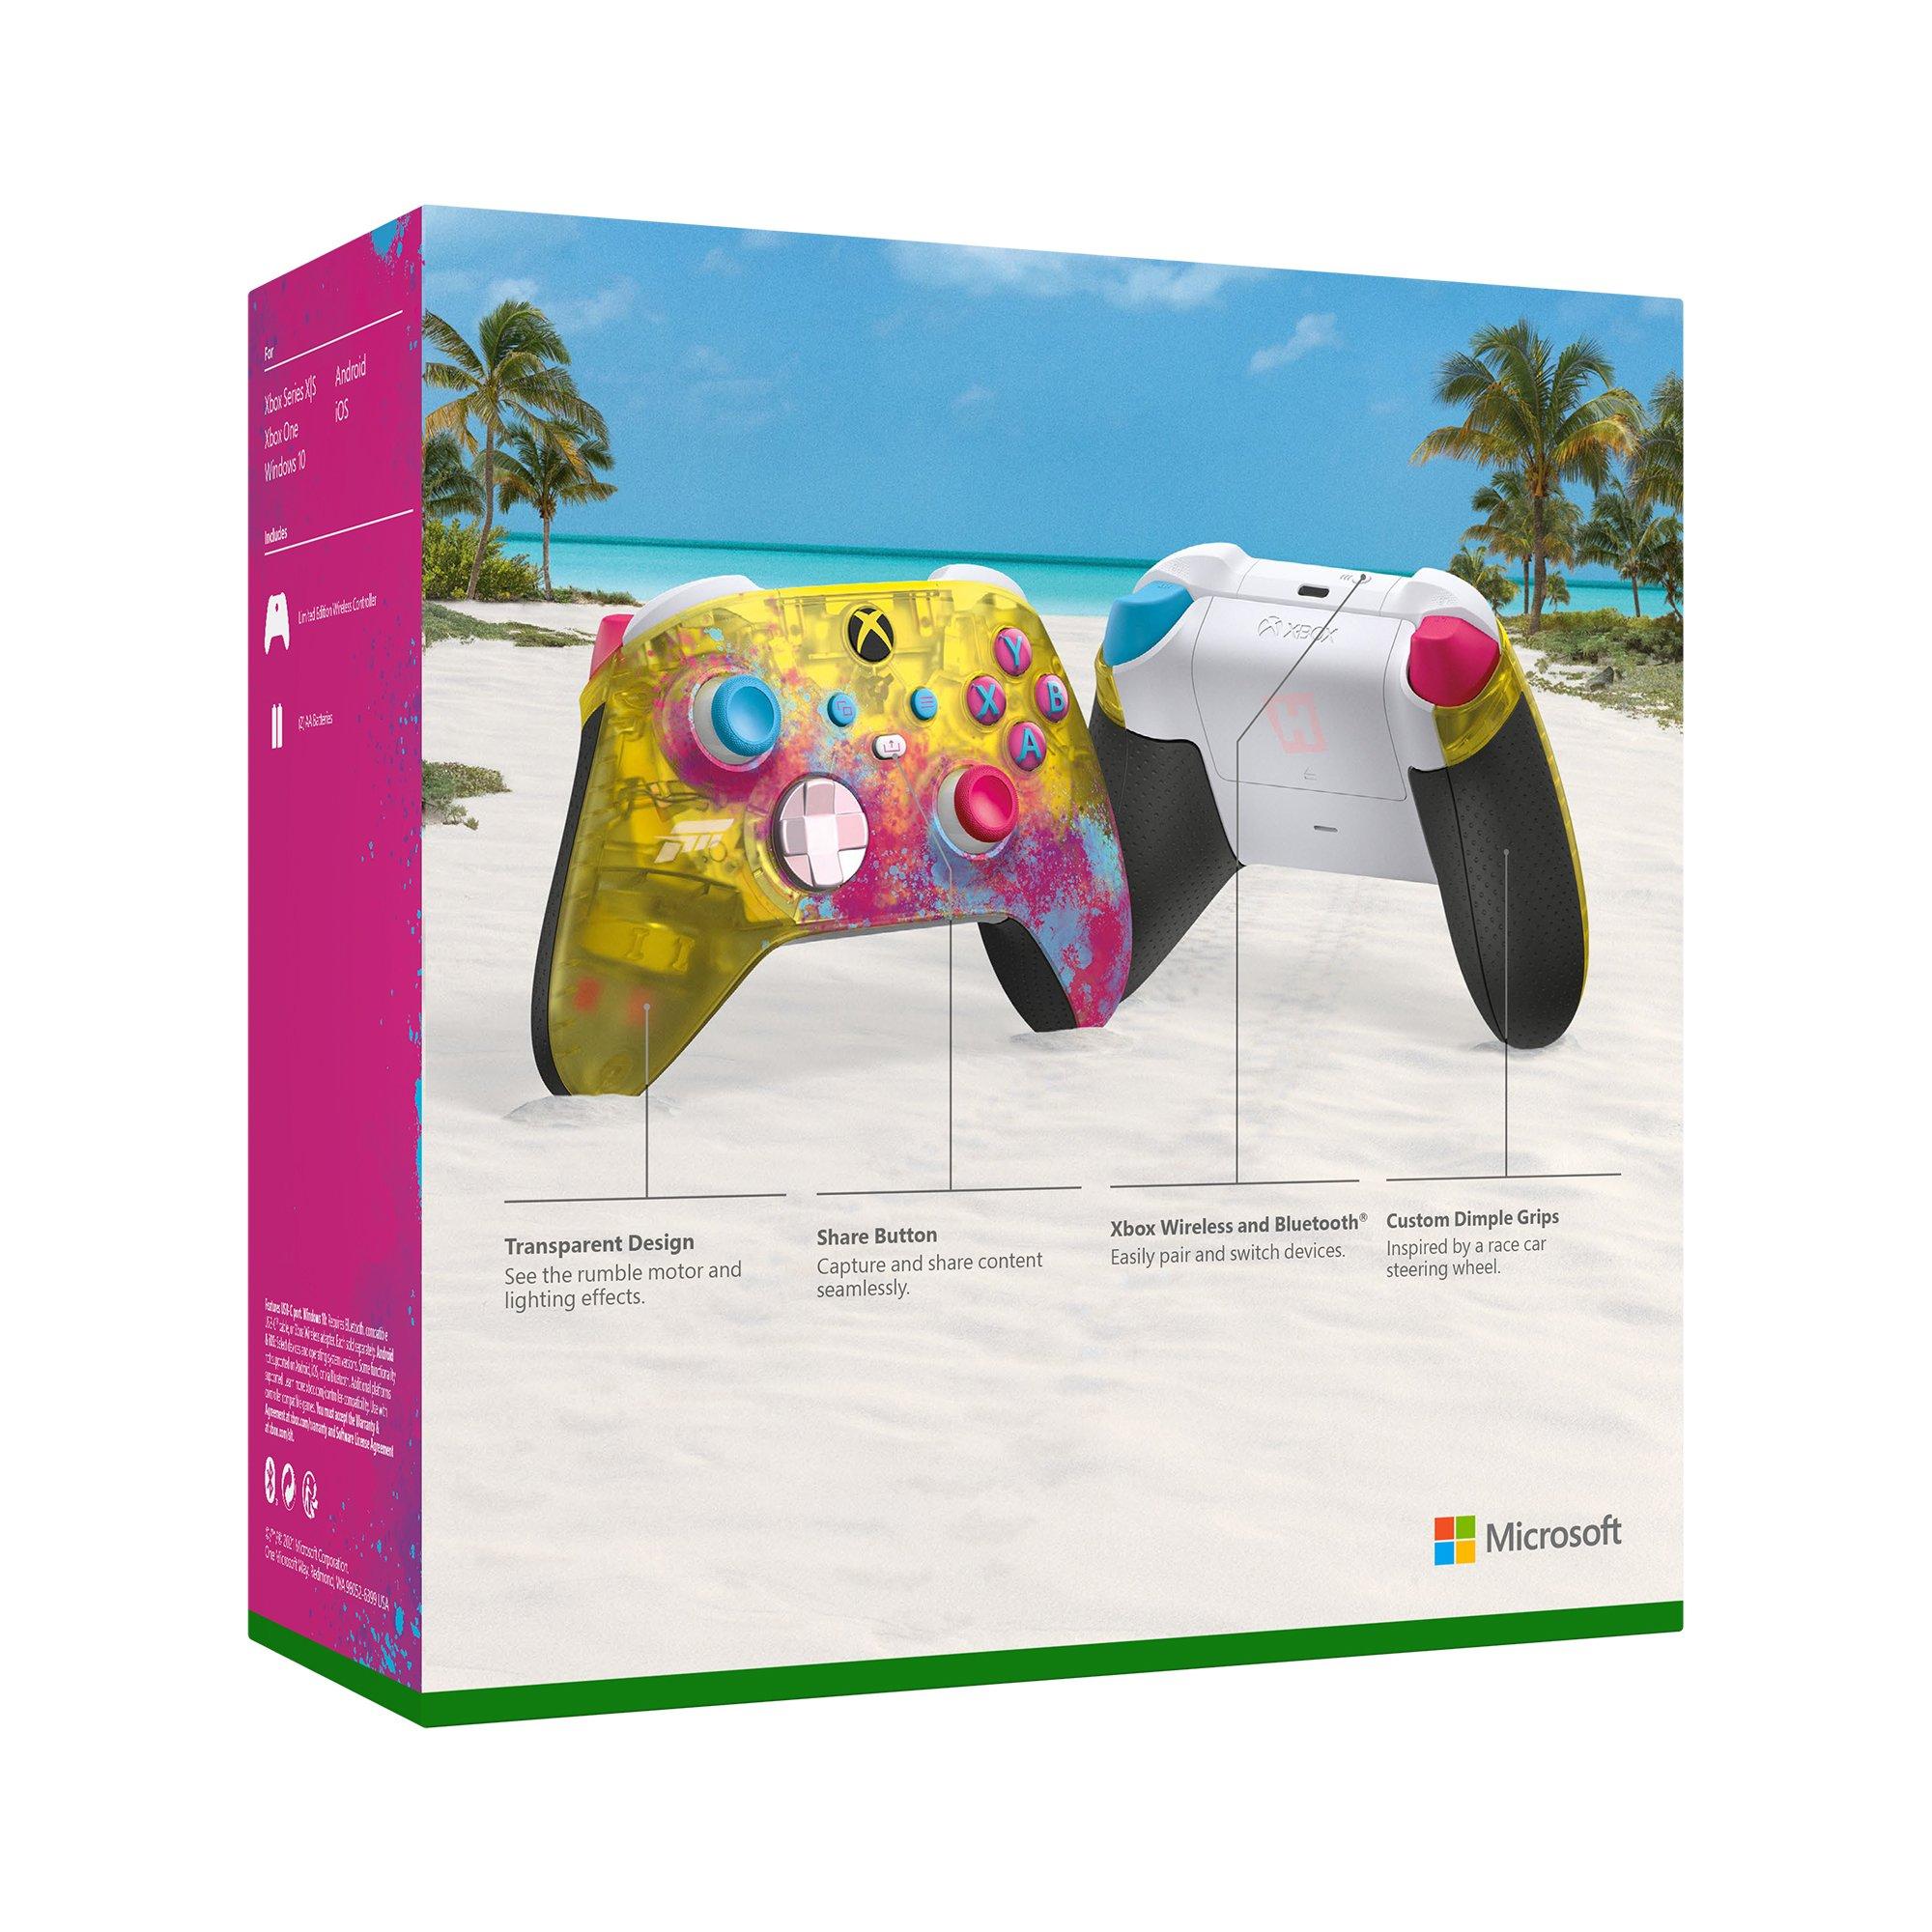  Xbox Wireless Controller Forza Horizon 5 Limited Edition - For  Xbox Series XS, Xbox One, Windows 10 PCs - Wireless & Bluetooth  Connectivity - Hybrid D-Pad & Share Buttons - Featuring